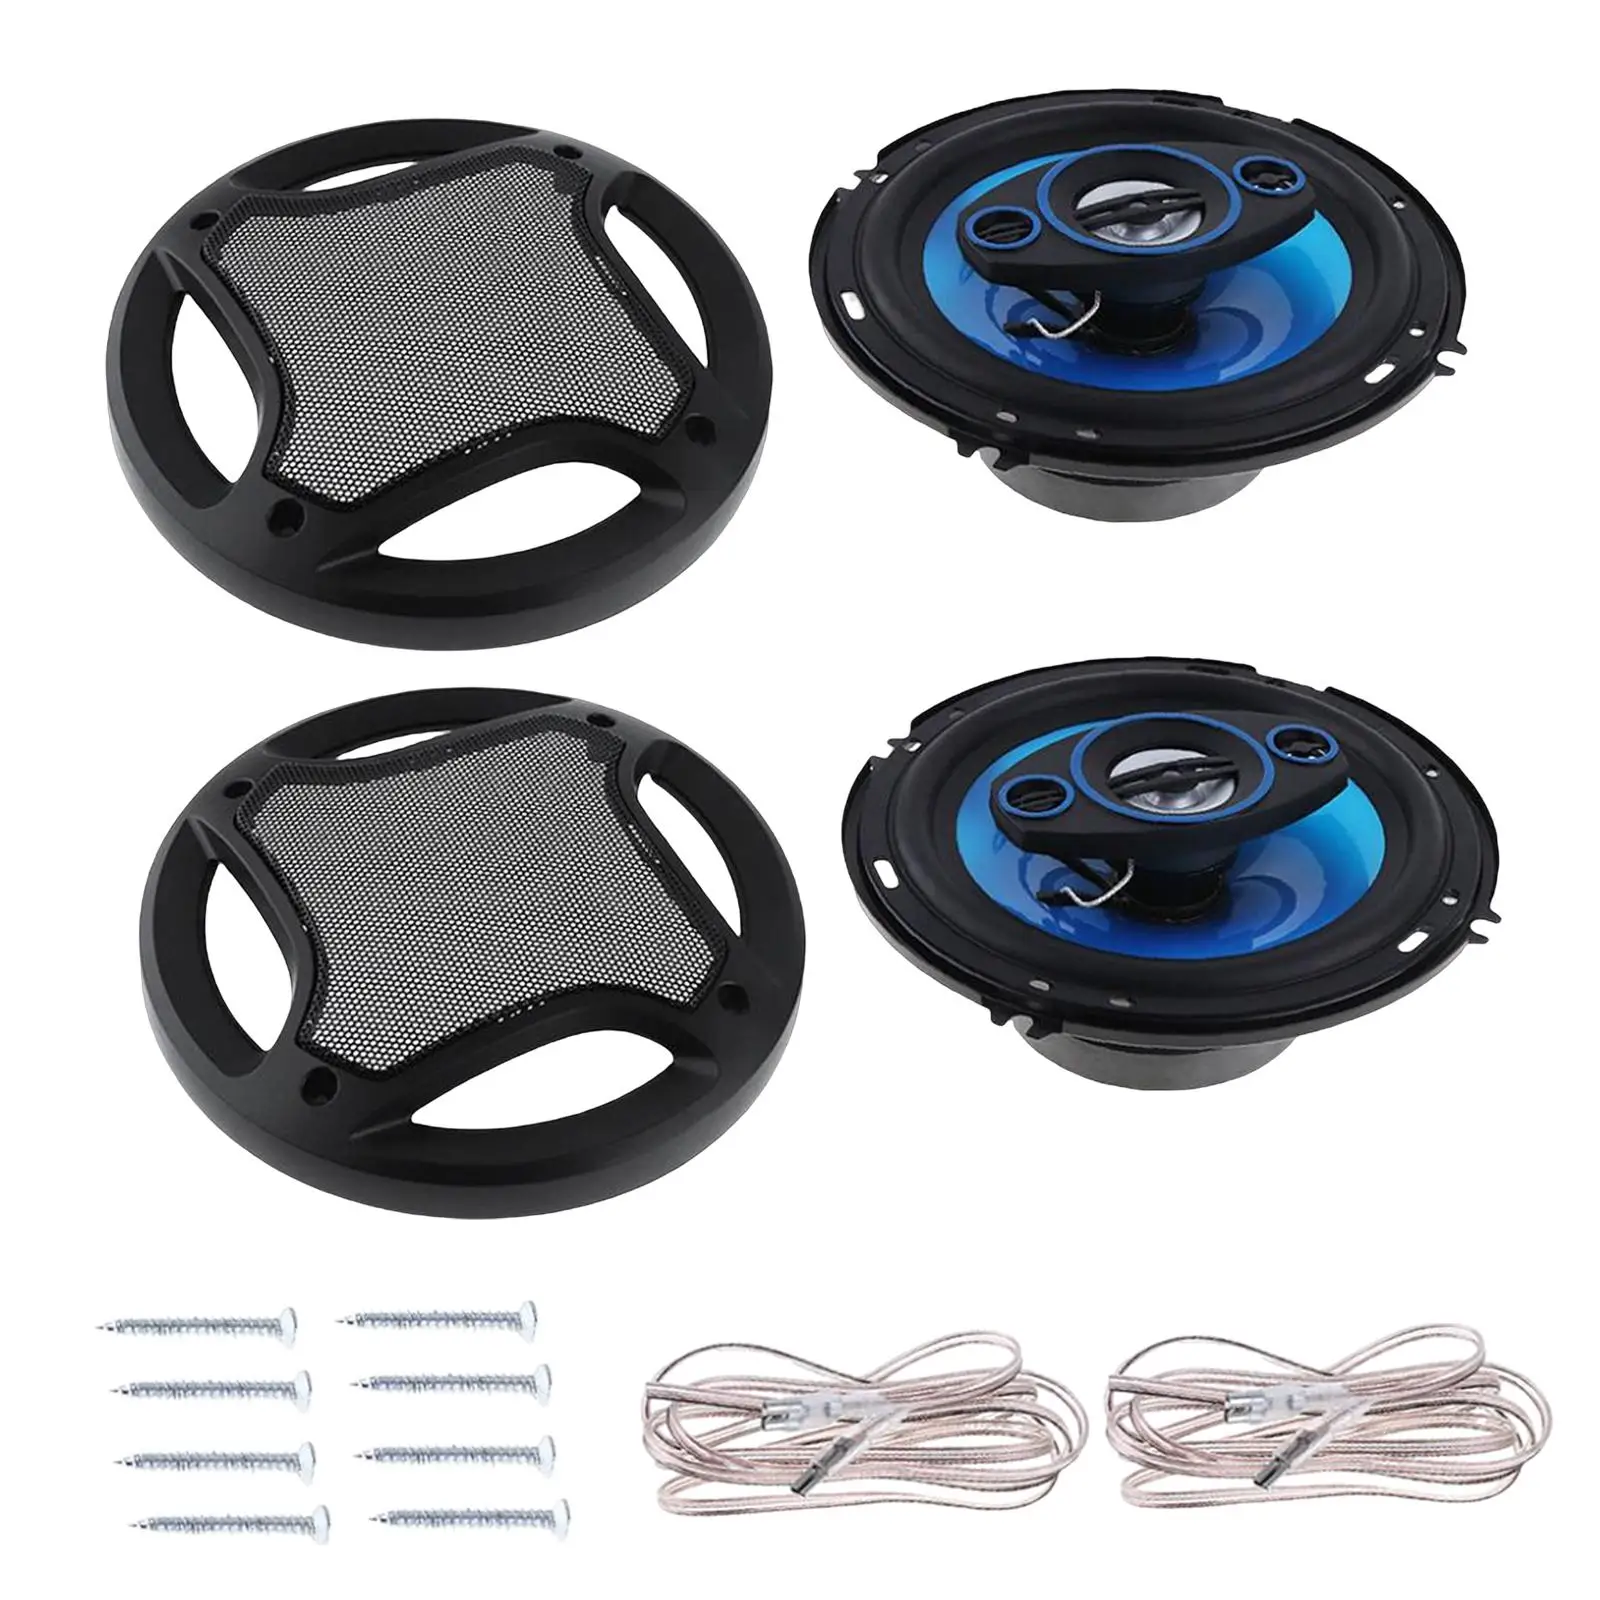 Set of 2 Coaxial Speakers Music Full Range Frequency HiFi 6 inch Stereo Home